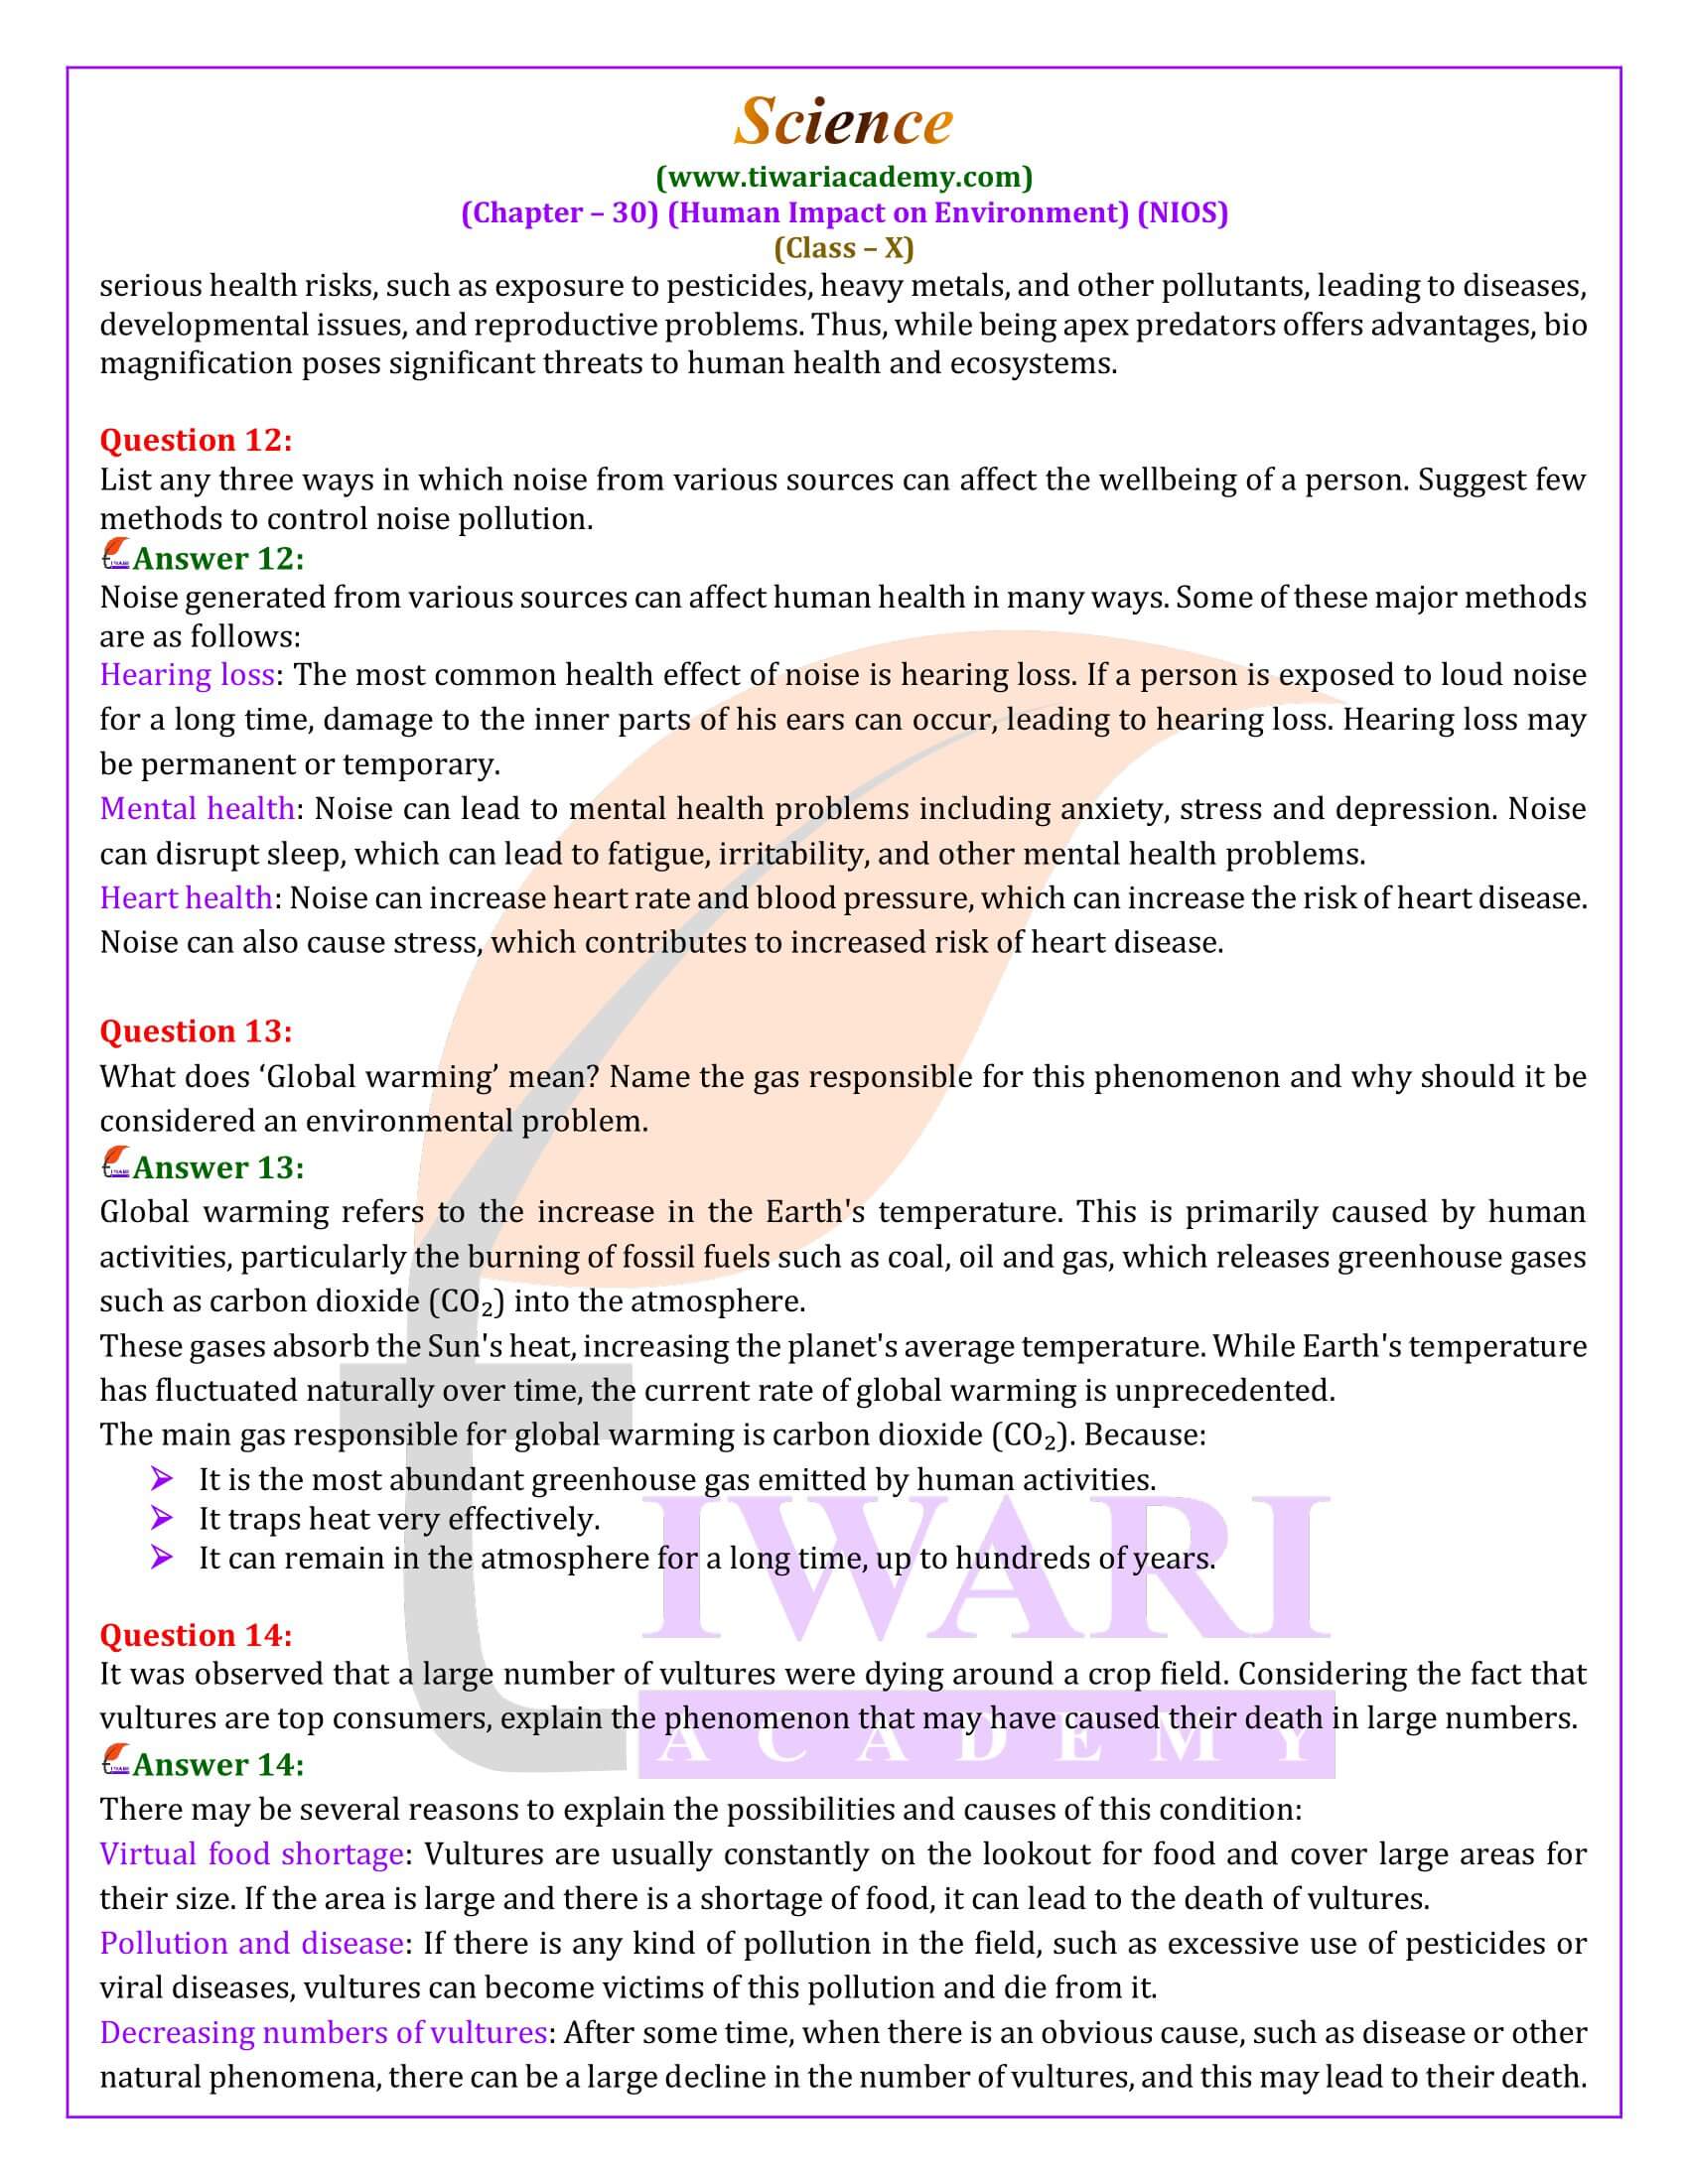 NIOS Class 10 Science Chapter 30 Revision